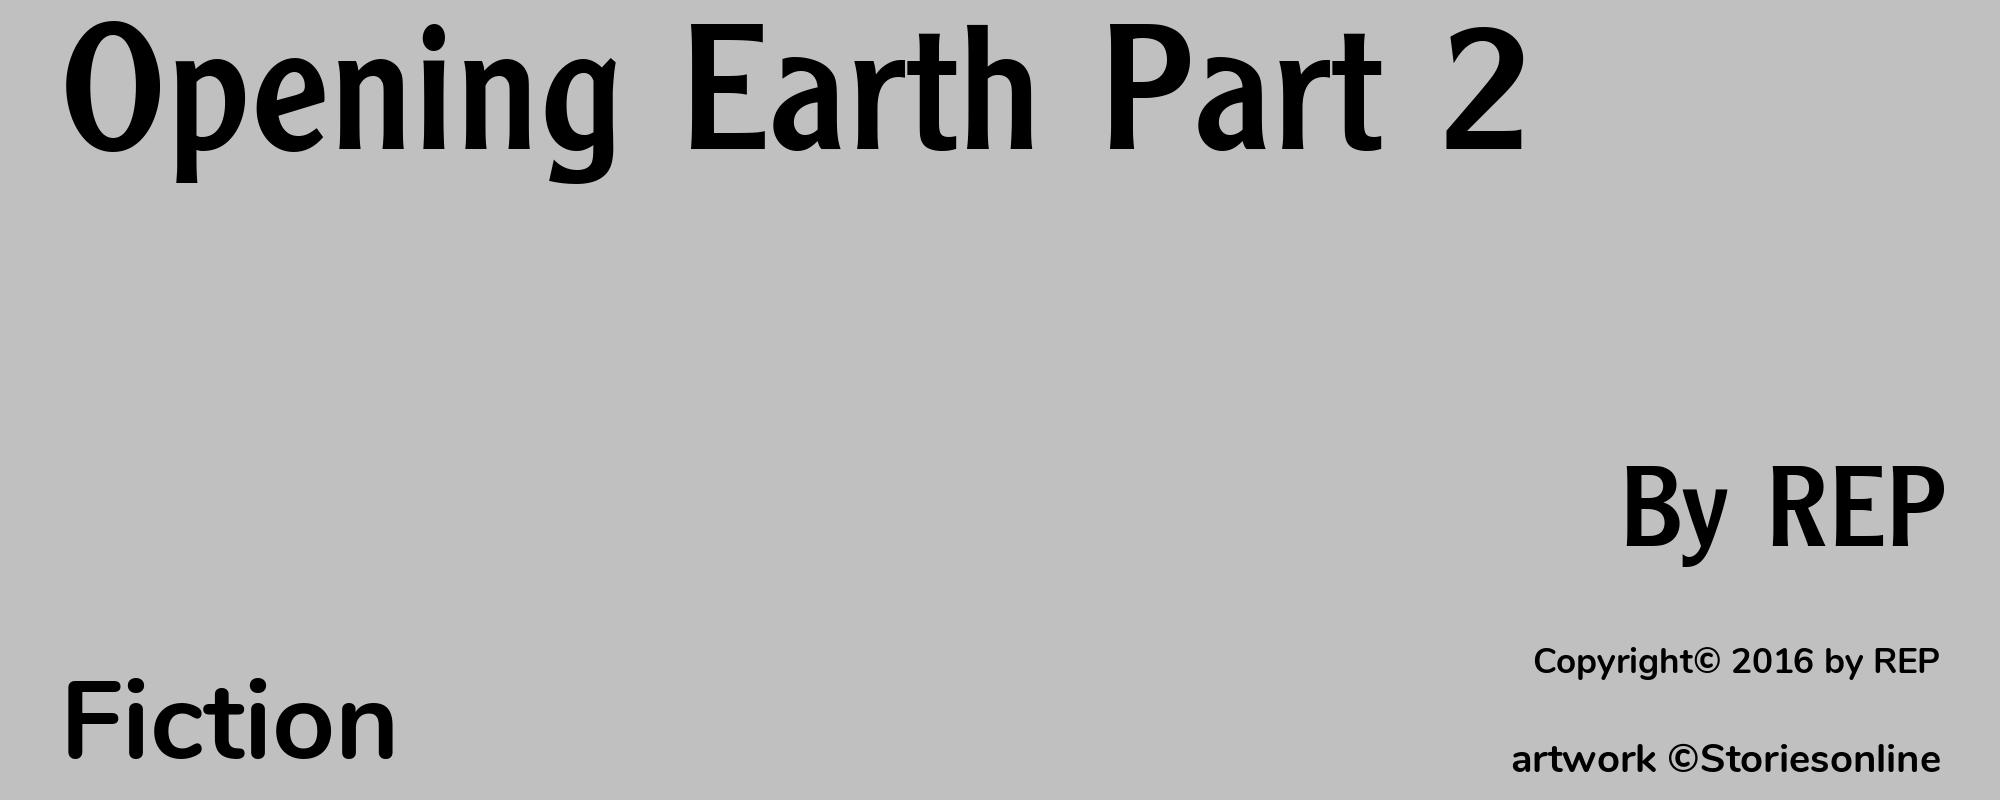 Opening Earth Part 2 - Cover